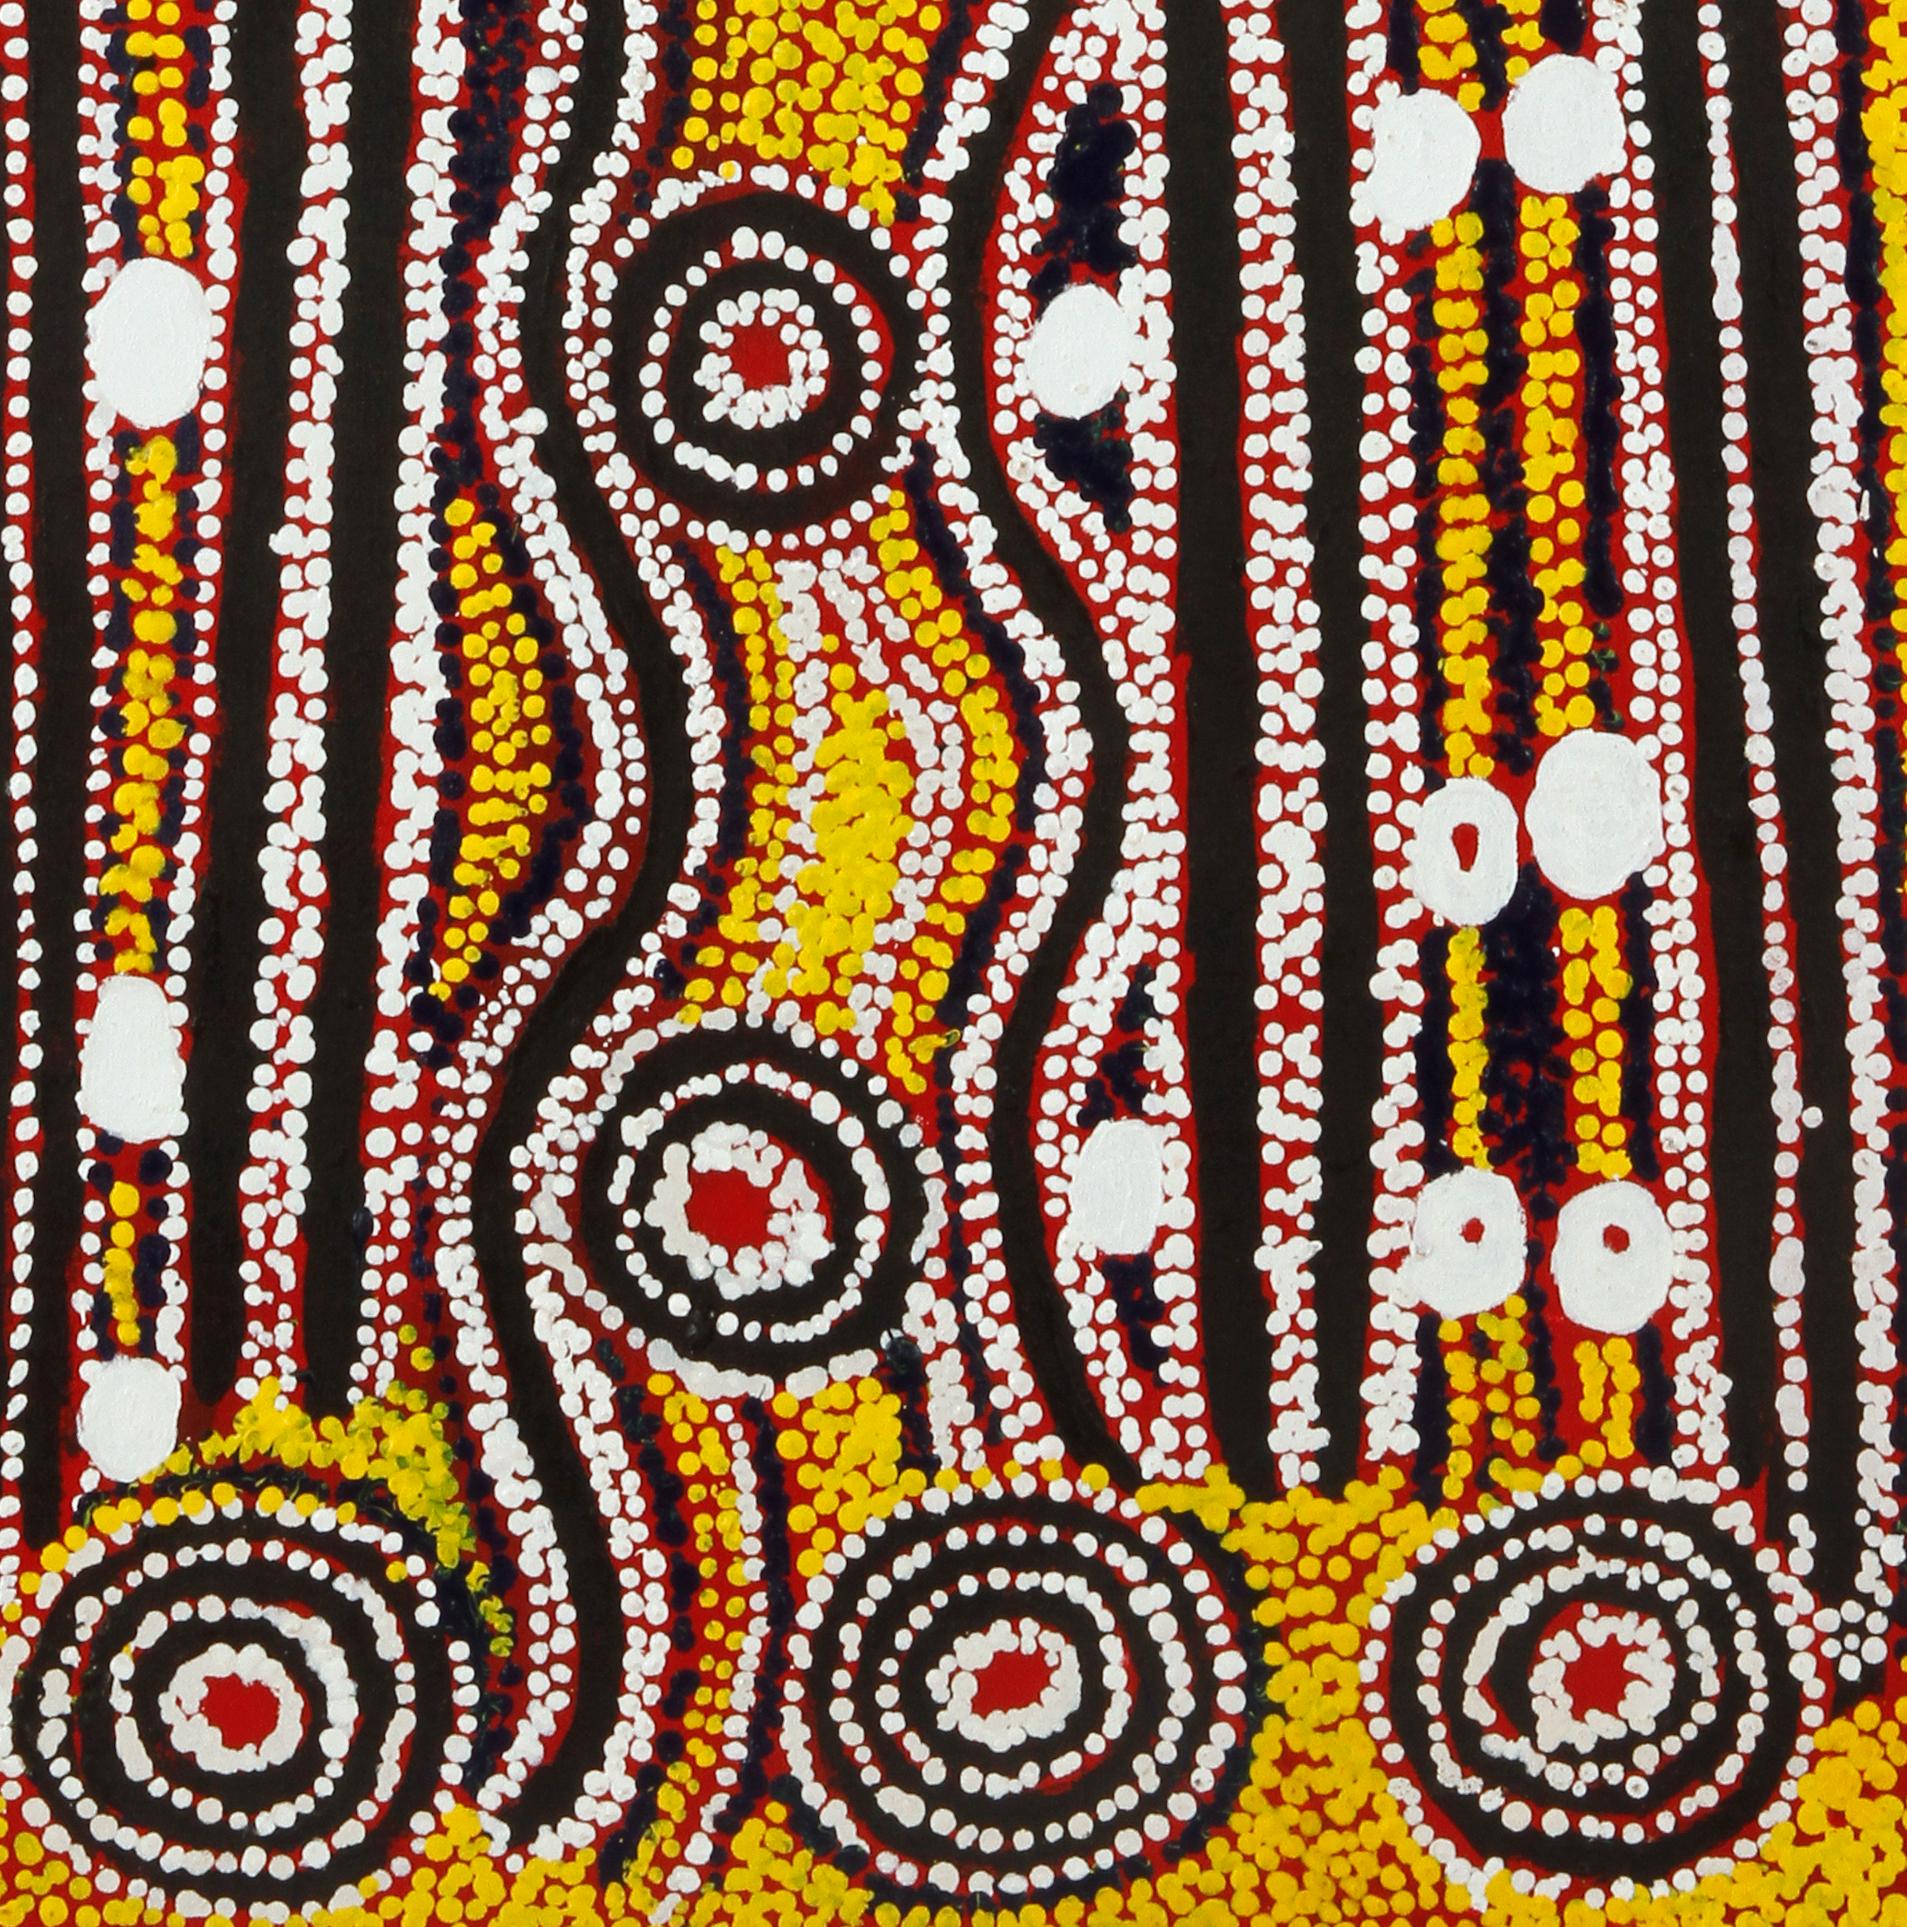 Fire Dreaming  - Pointillist Painting by Paddy Sims Japaljarri